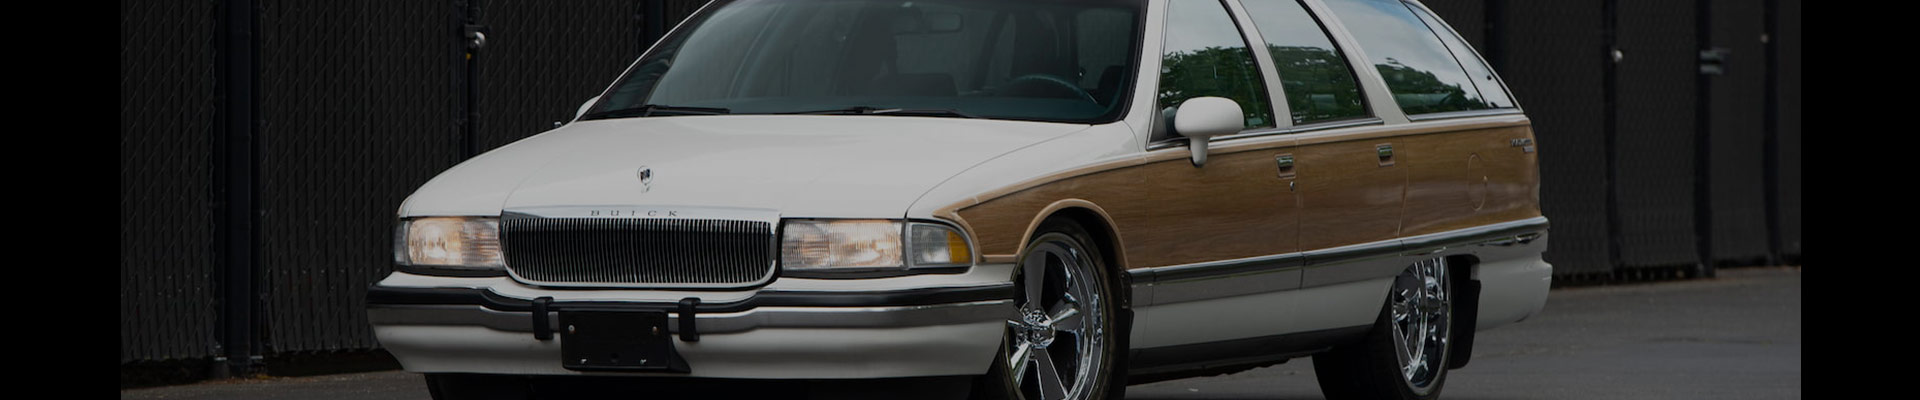 Shop Replacement and OEM 1993 Buick Roadmaster Parts with Discounted Price on the Net